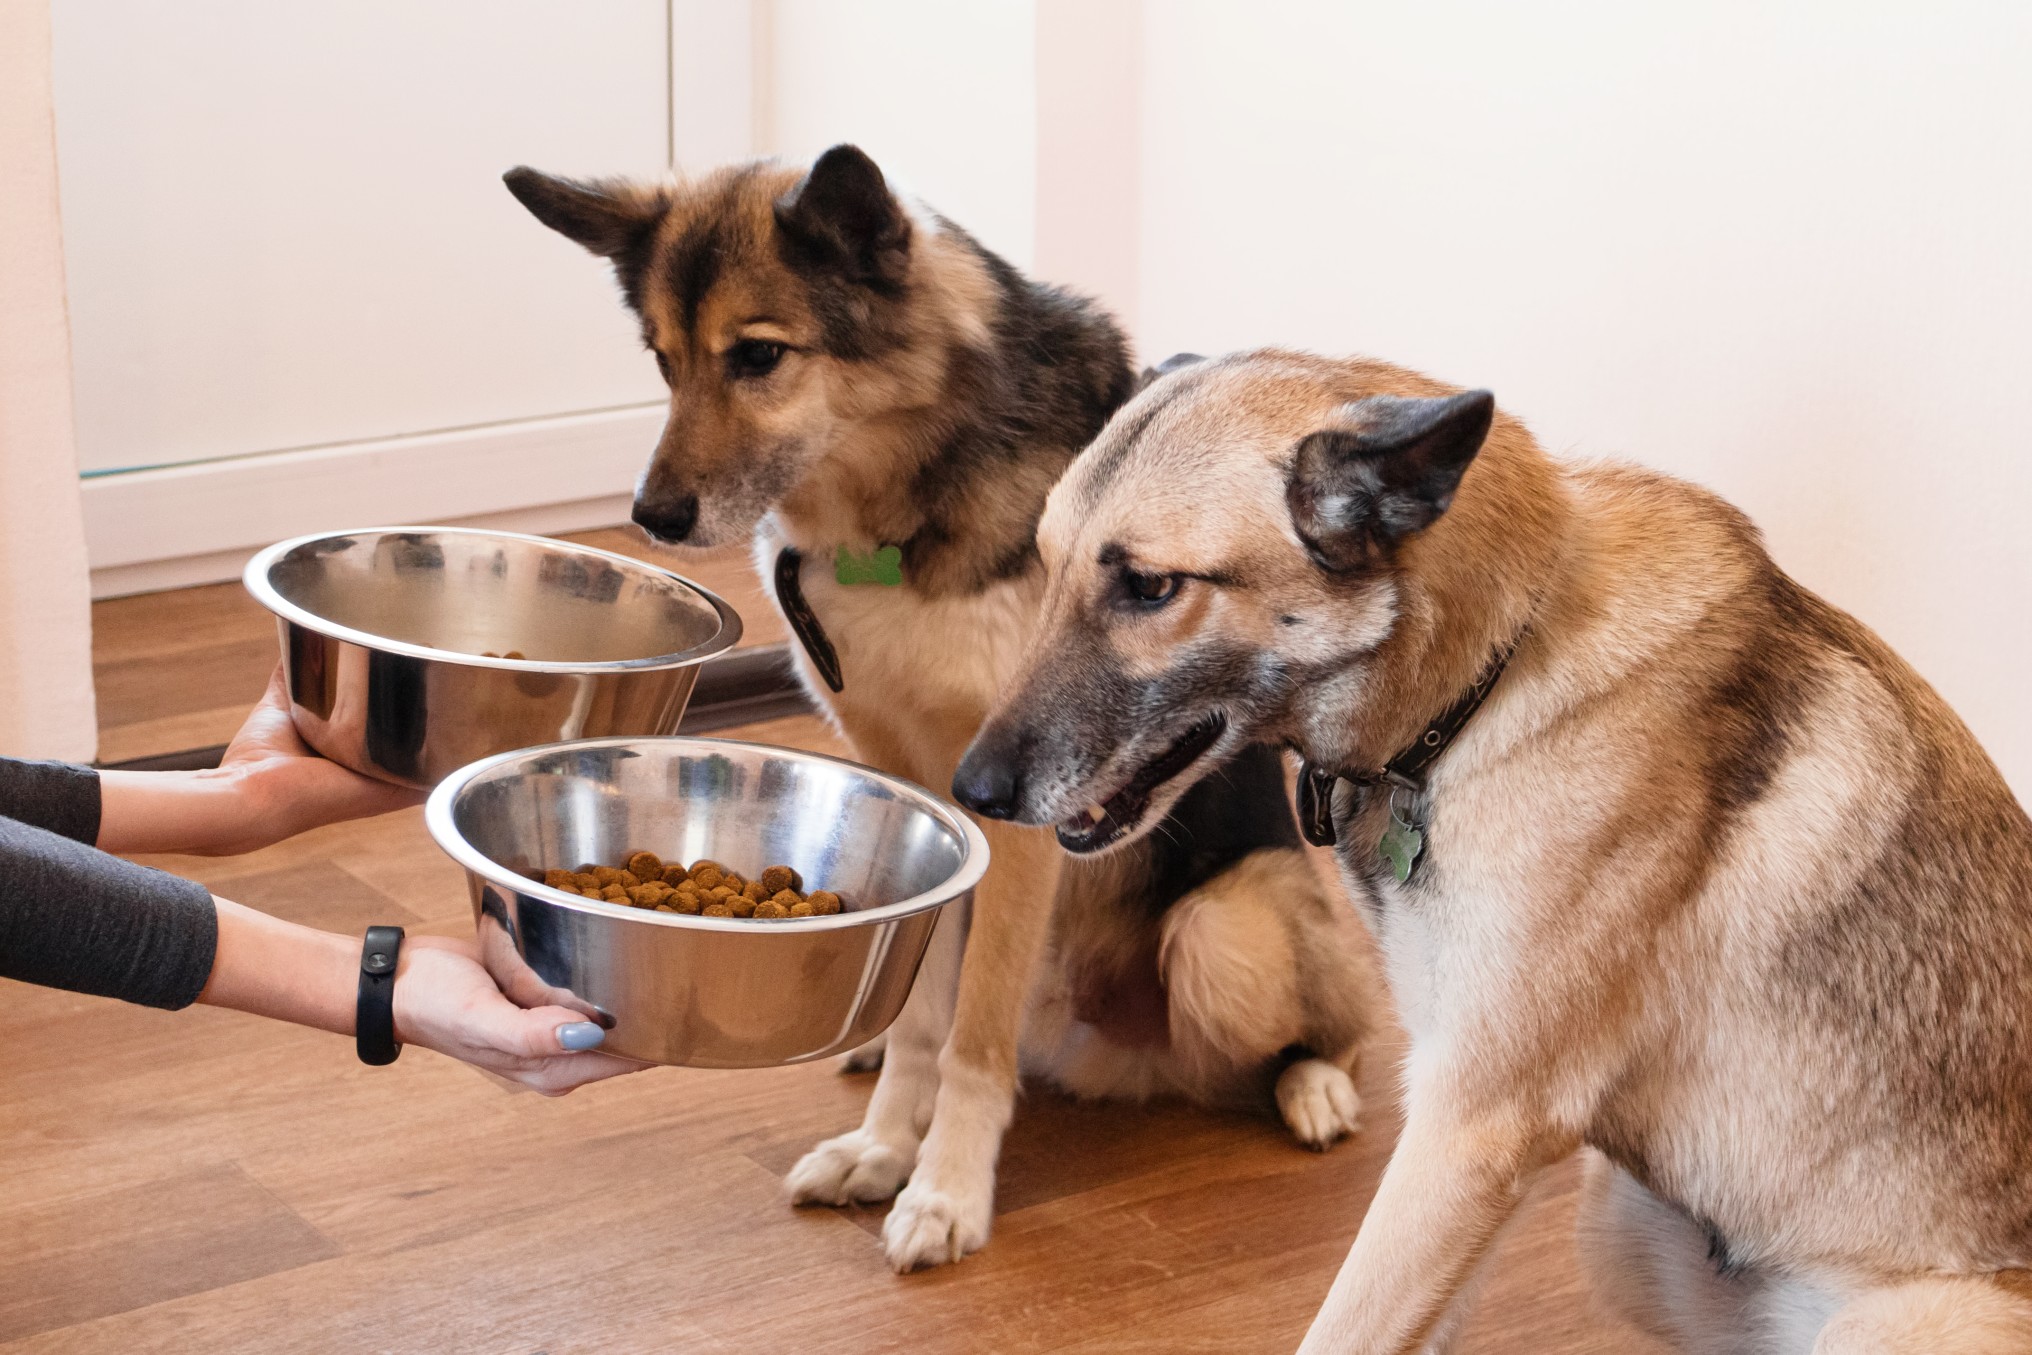 https://www.northpointpets.com/wp-content/uploads/2019/06/two-hungry-dogs-are-waiting-for-feeding-the-owner-gives-his-dogs-the-bowls-of-granules_t20_gR0eZk.jpg